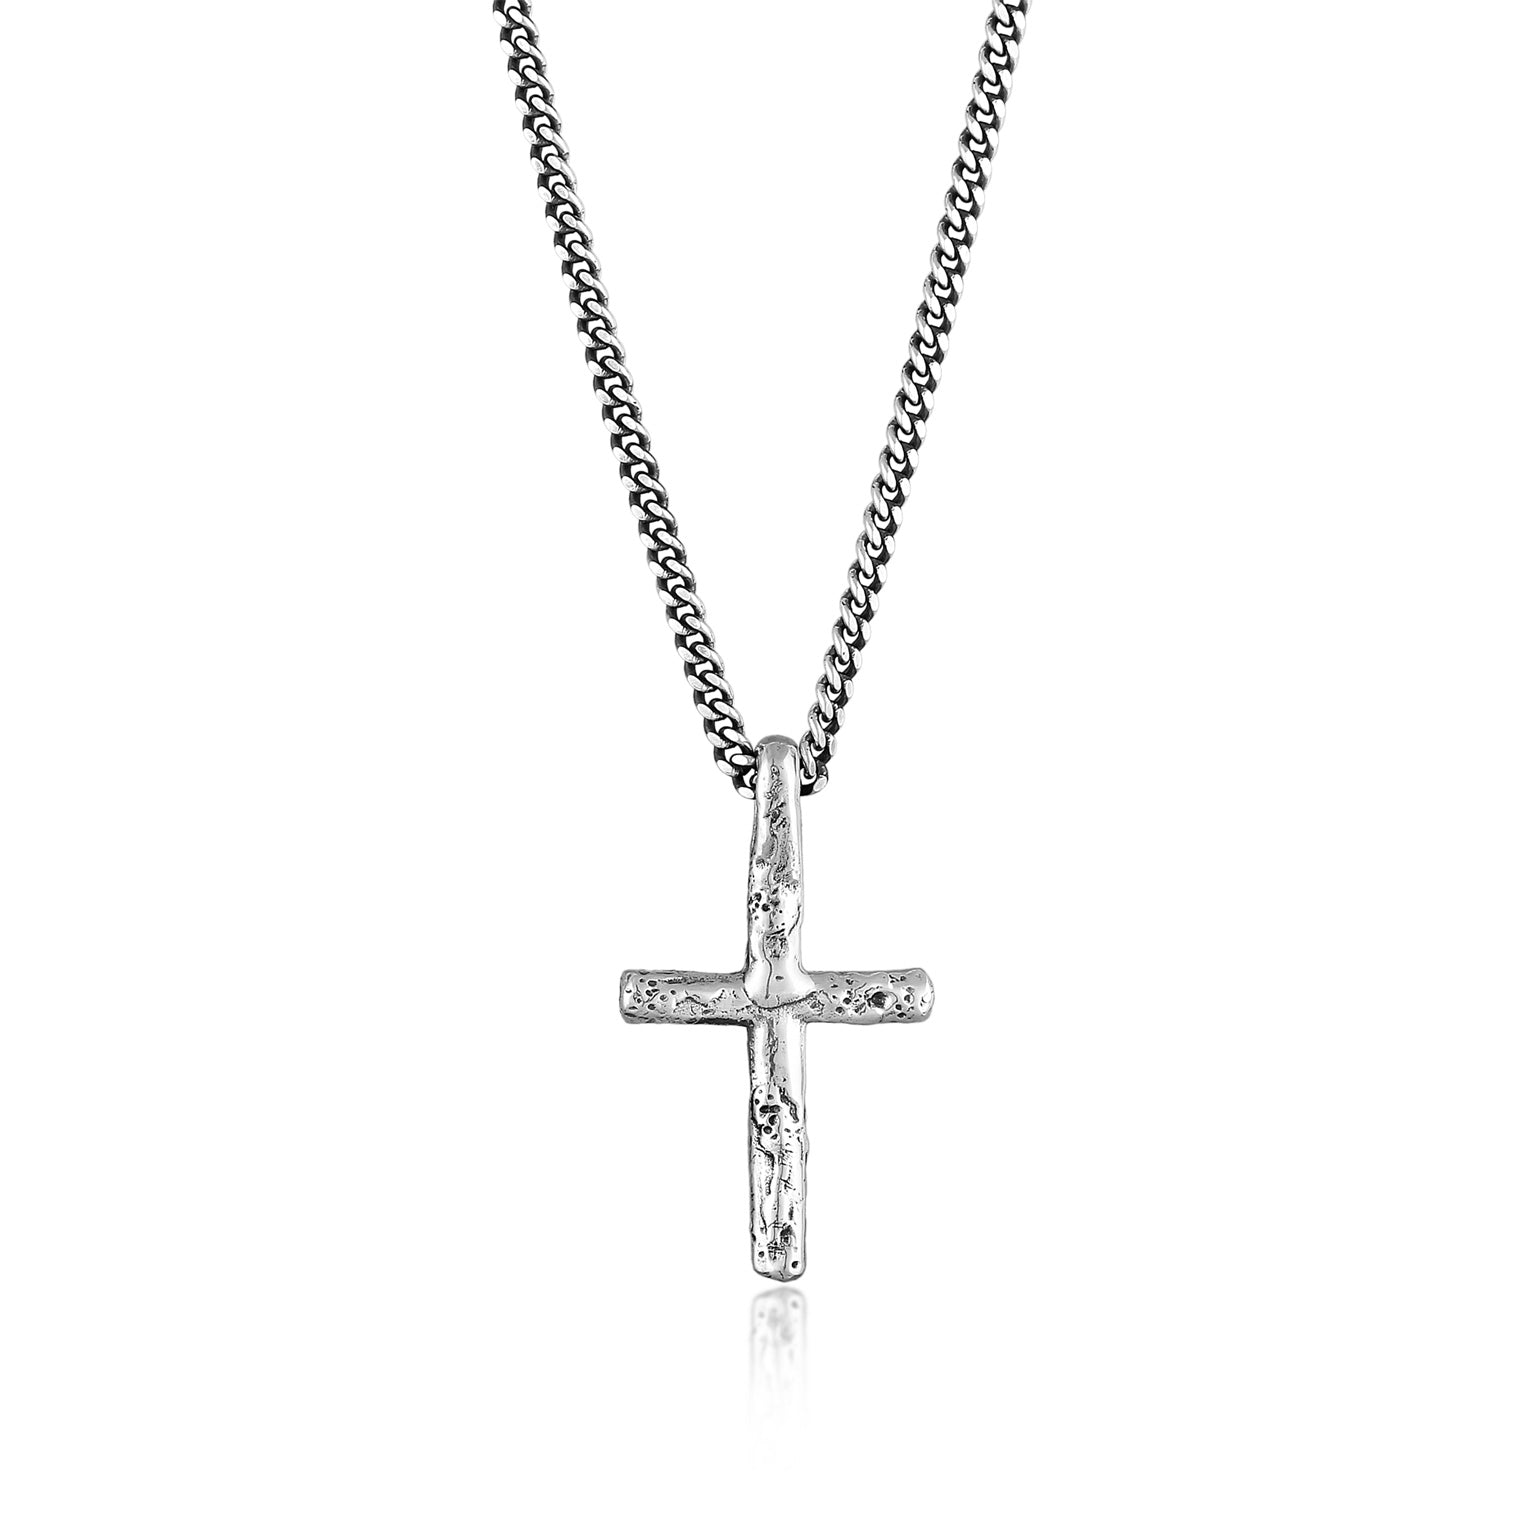 Silver cross necklace – Haze and Glory